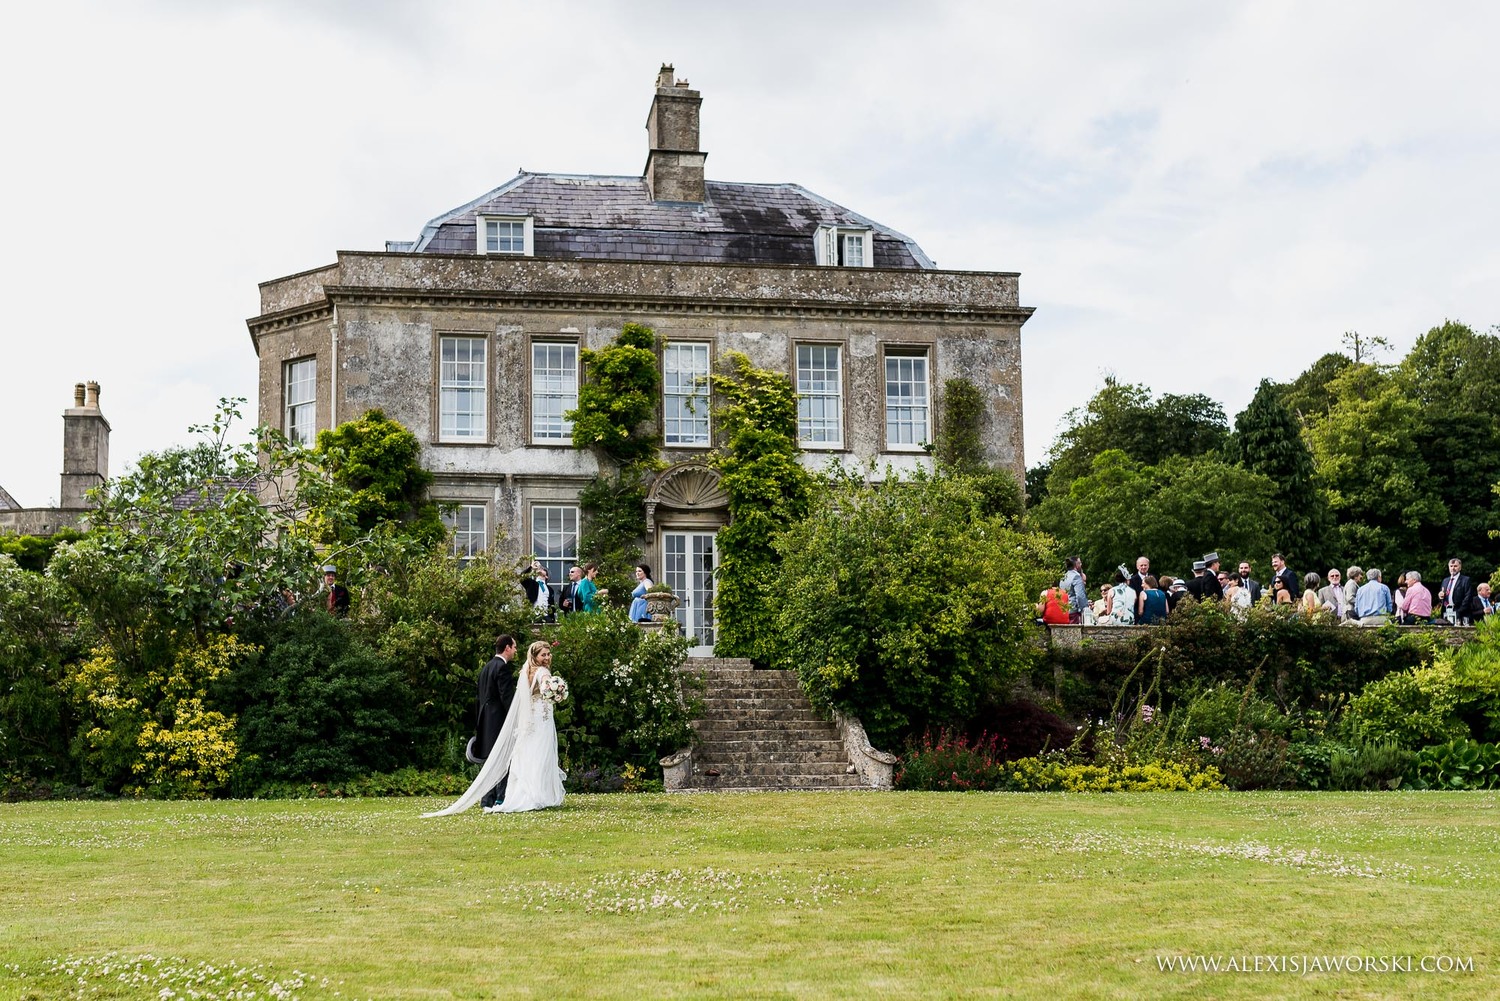 What To Look For In The Perfect Wedding Venue